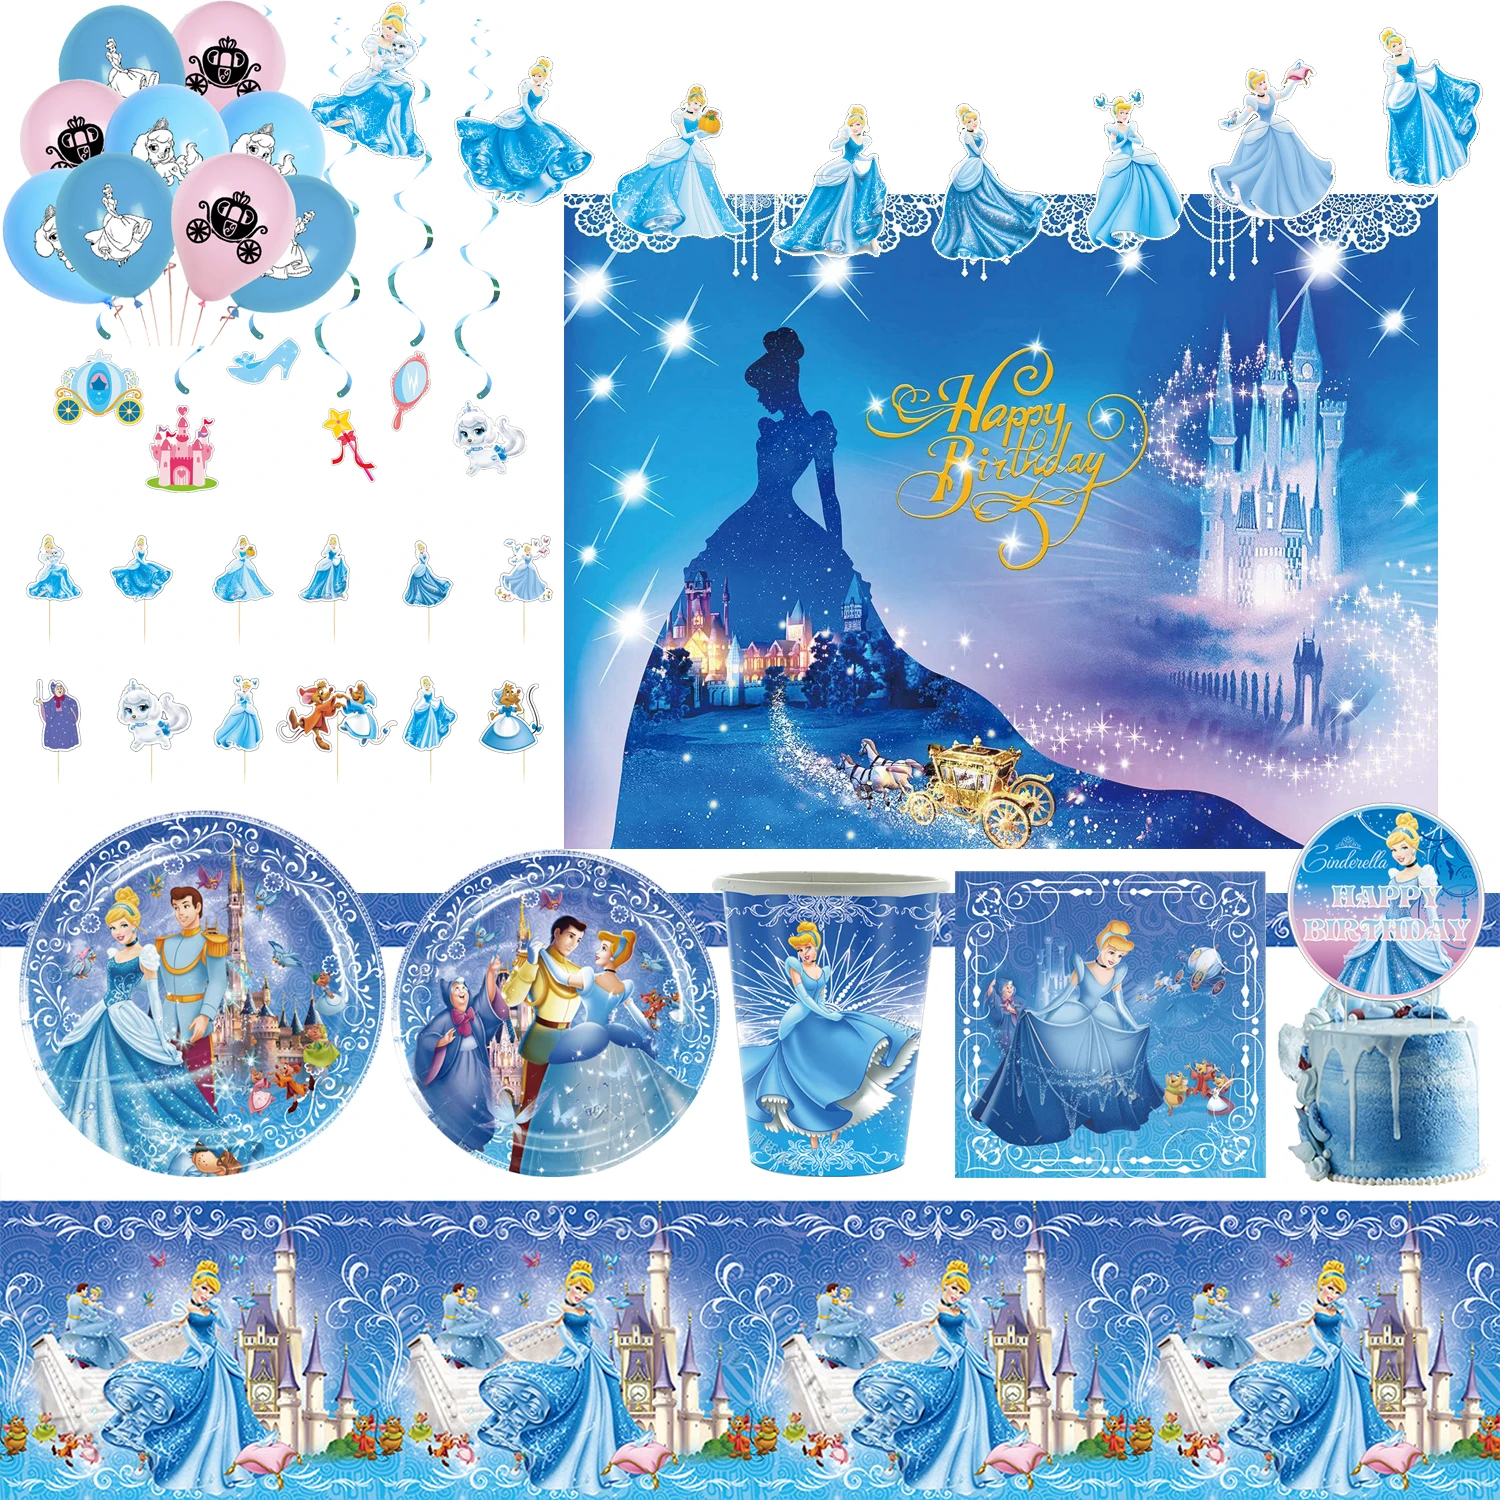 Disney Blue Cinderella Princess Birthday Party Decoration Supplies Disposable Cutlery Balloon Background Baby Shower Girl Gift disney american celebrities taylor swift theme birthday party decorative disposable tableware background baby shower girl gift